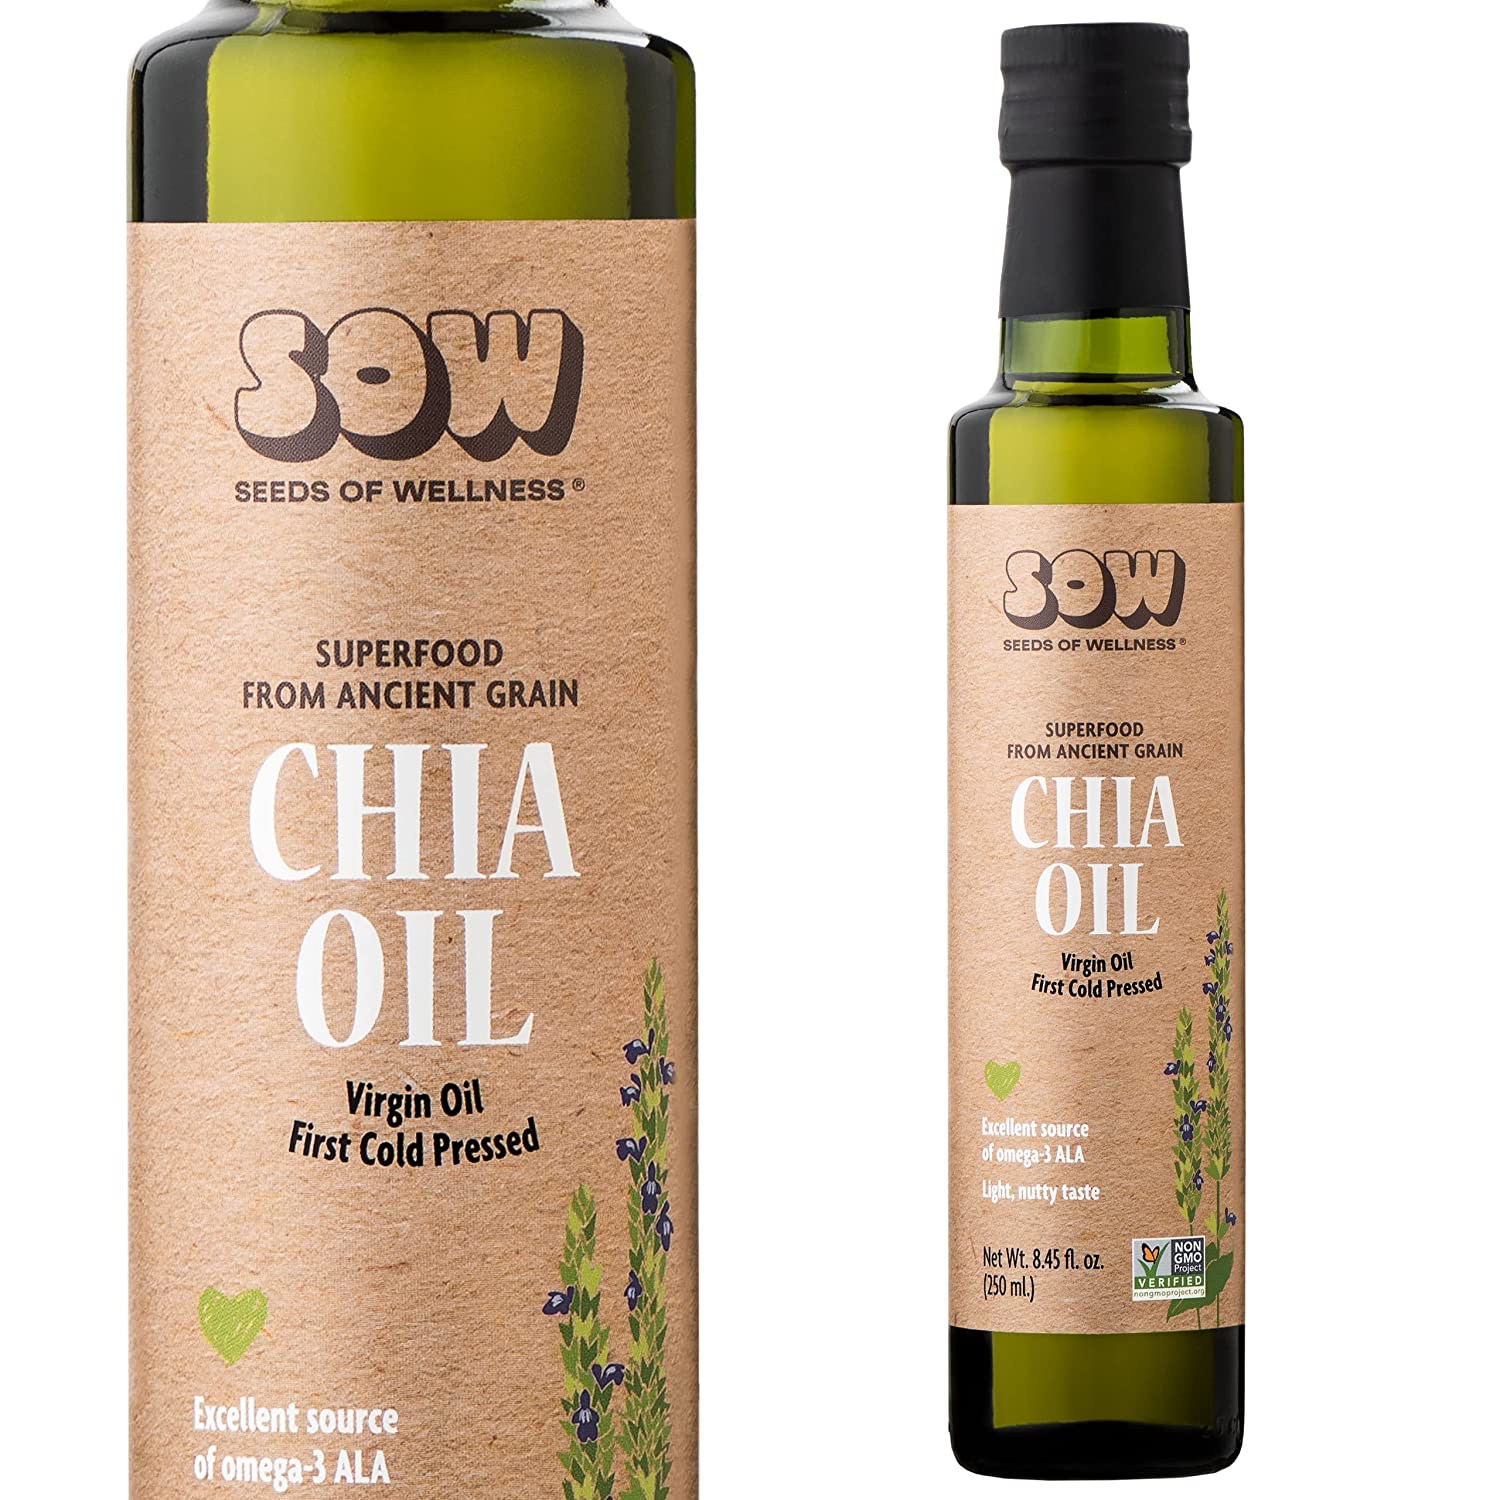 chia oil benefits sow